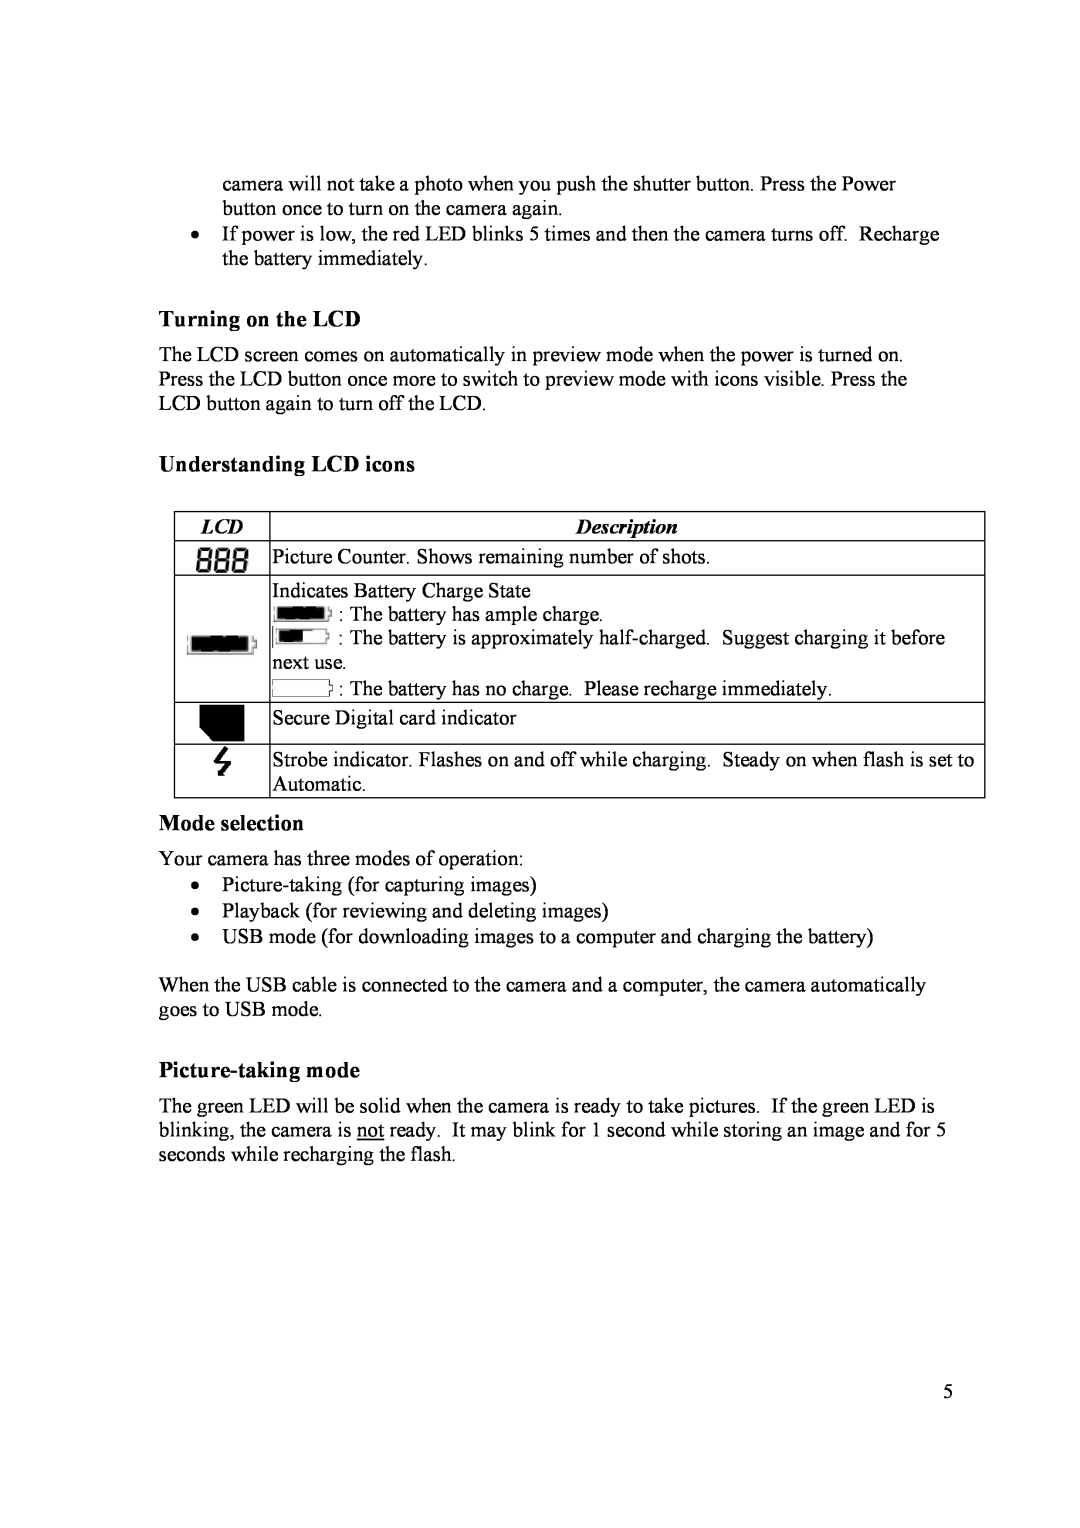 Samsung 2 user manual Turning on the LCD, Understanding LCD icons, Mode selection, Picture-taking mode, Description 